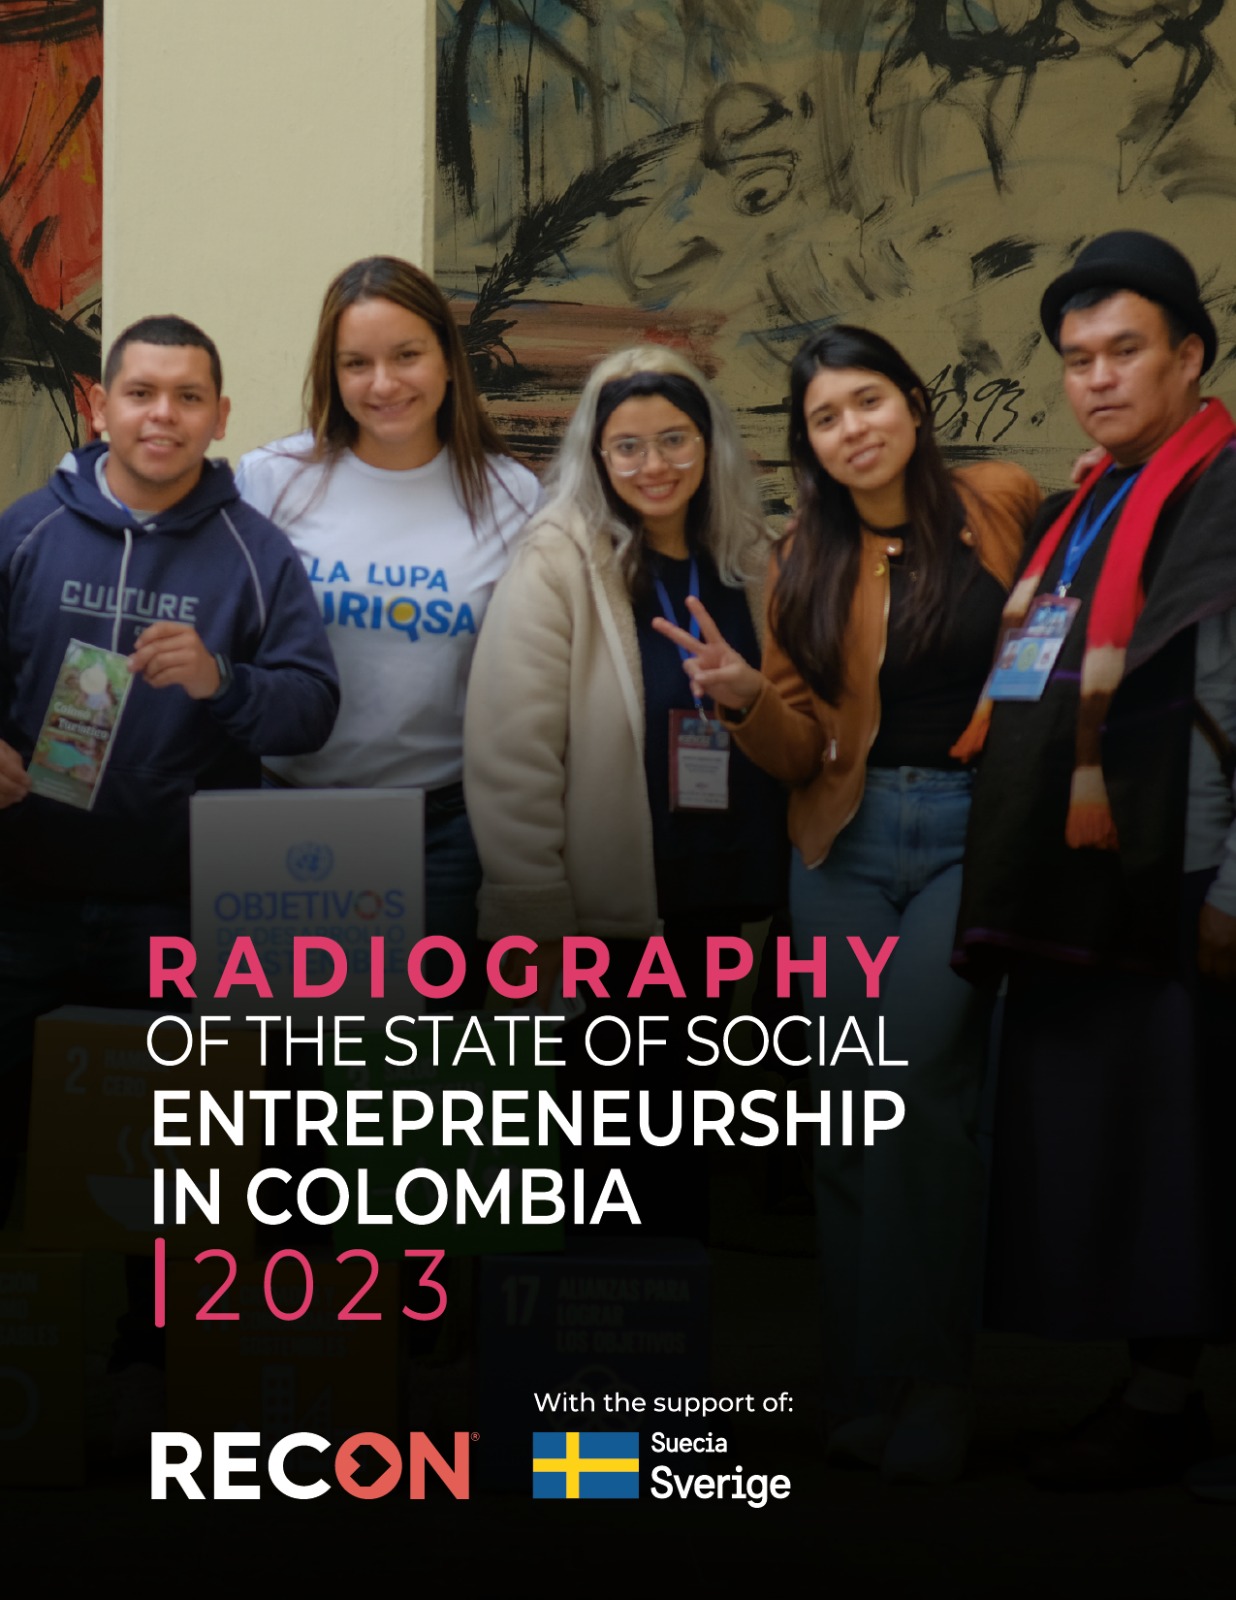 Radiography of the state of social entrepreneurship in Colombia – RECON 2023